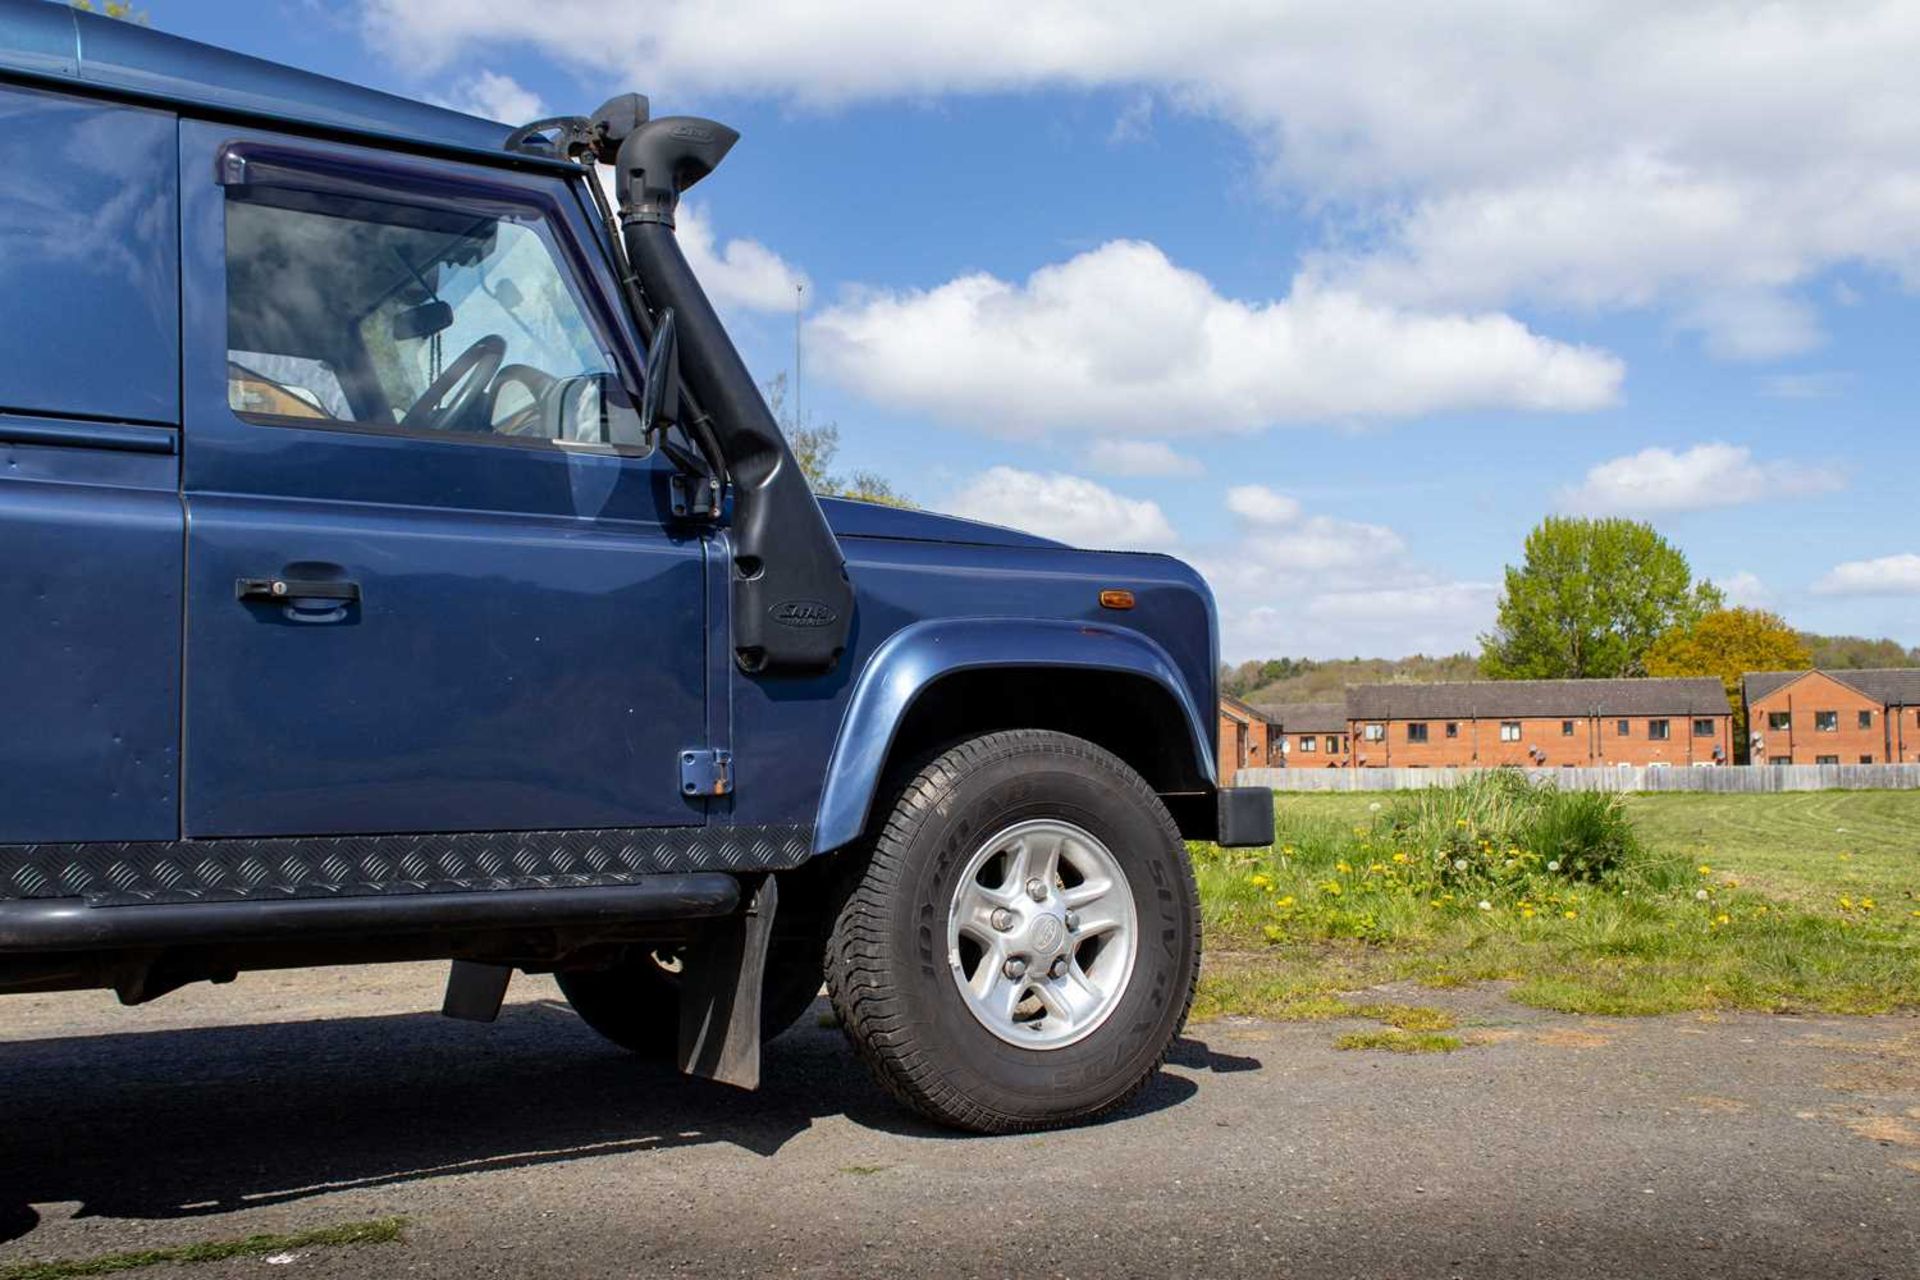 2007 Land Rover Defender 90 County  Powered by the 2.4-litre TDCi unit and features numerous tastefu - Image 21 of 76